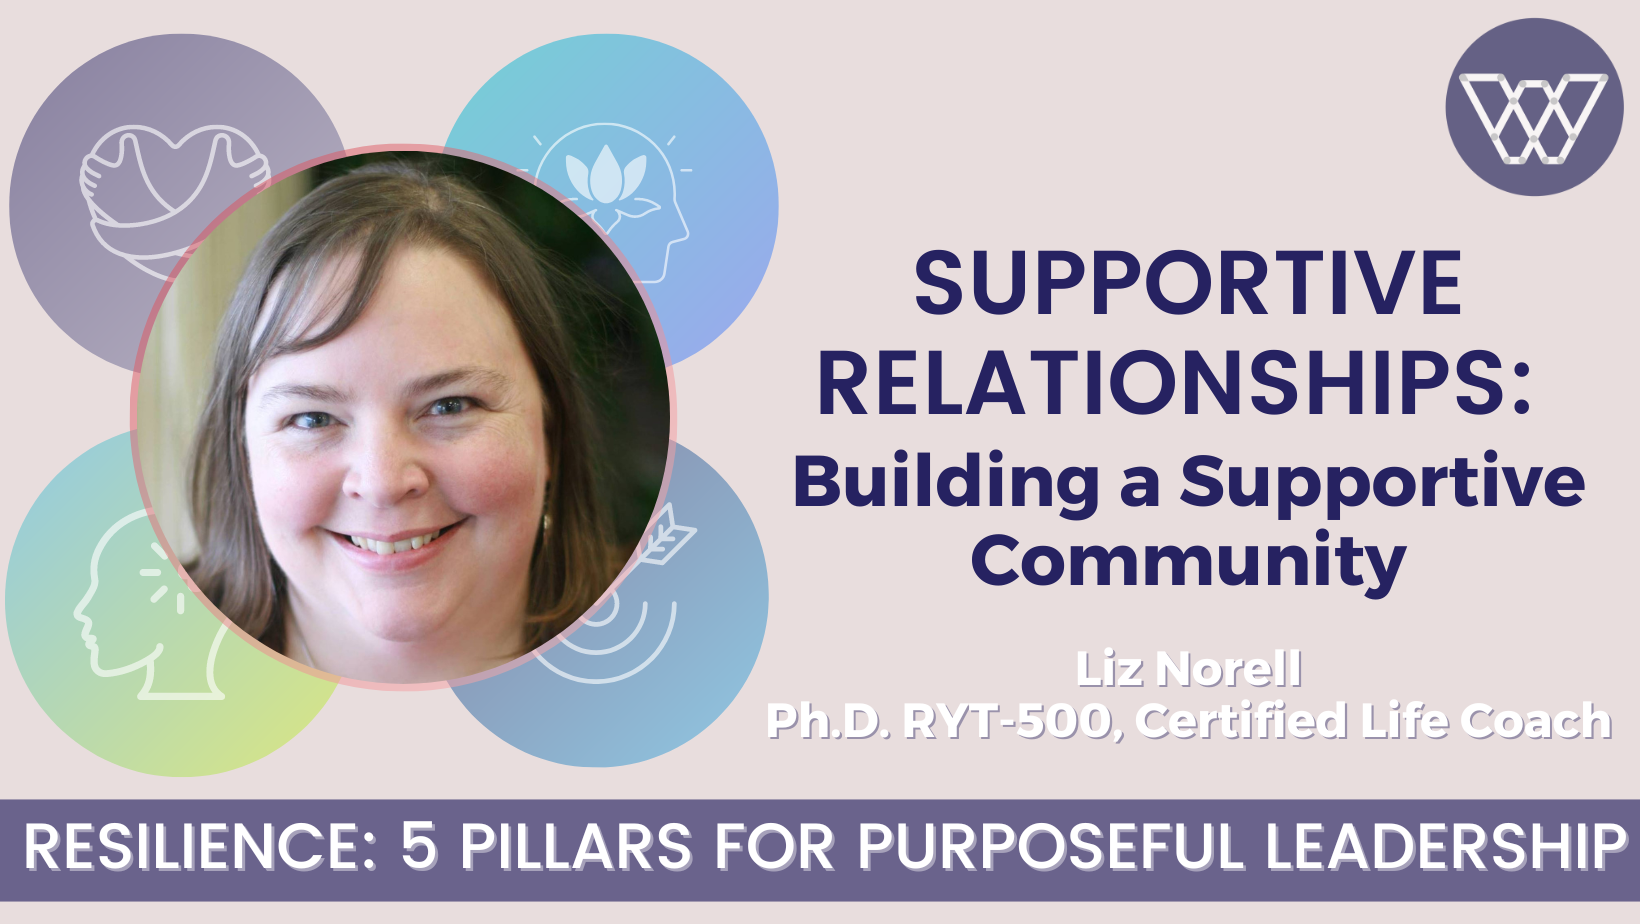 Leadership Study - Supportive Relationships: Building a Supportive Community @ TBD